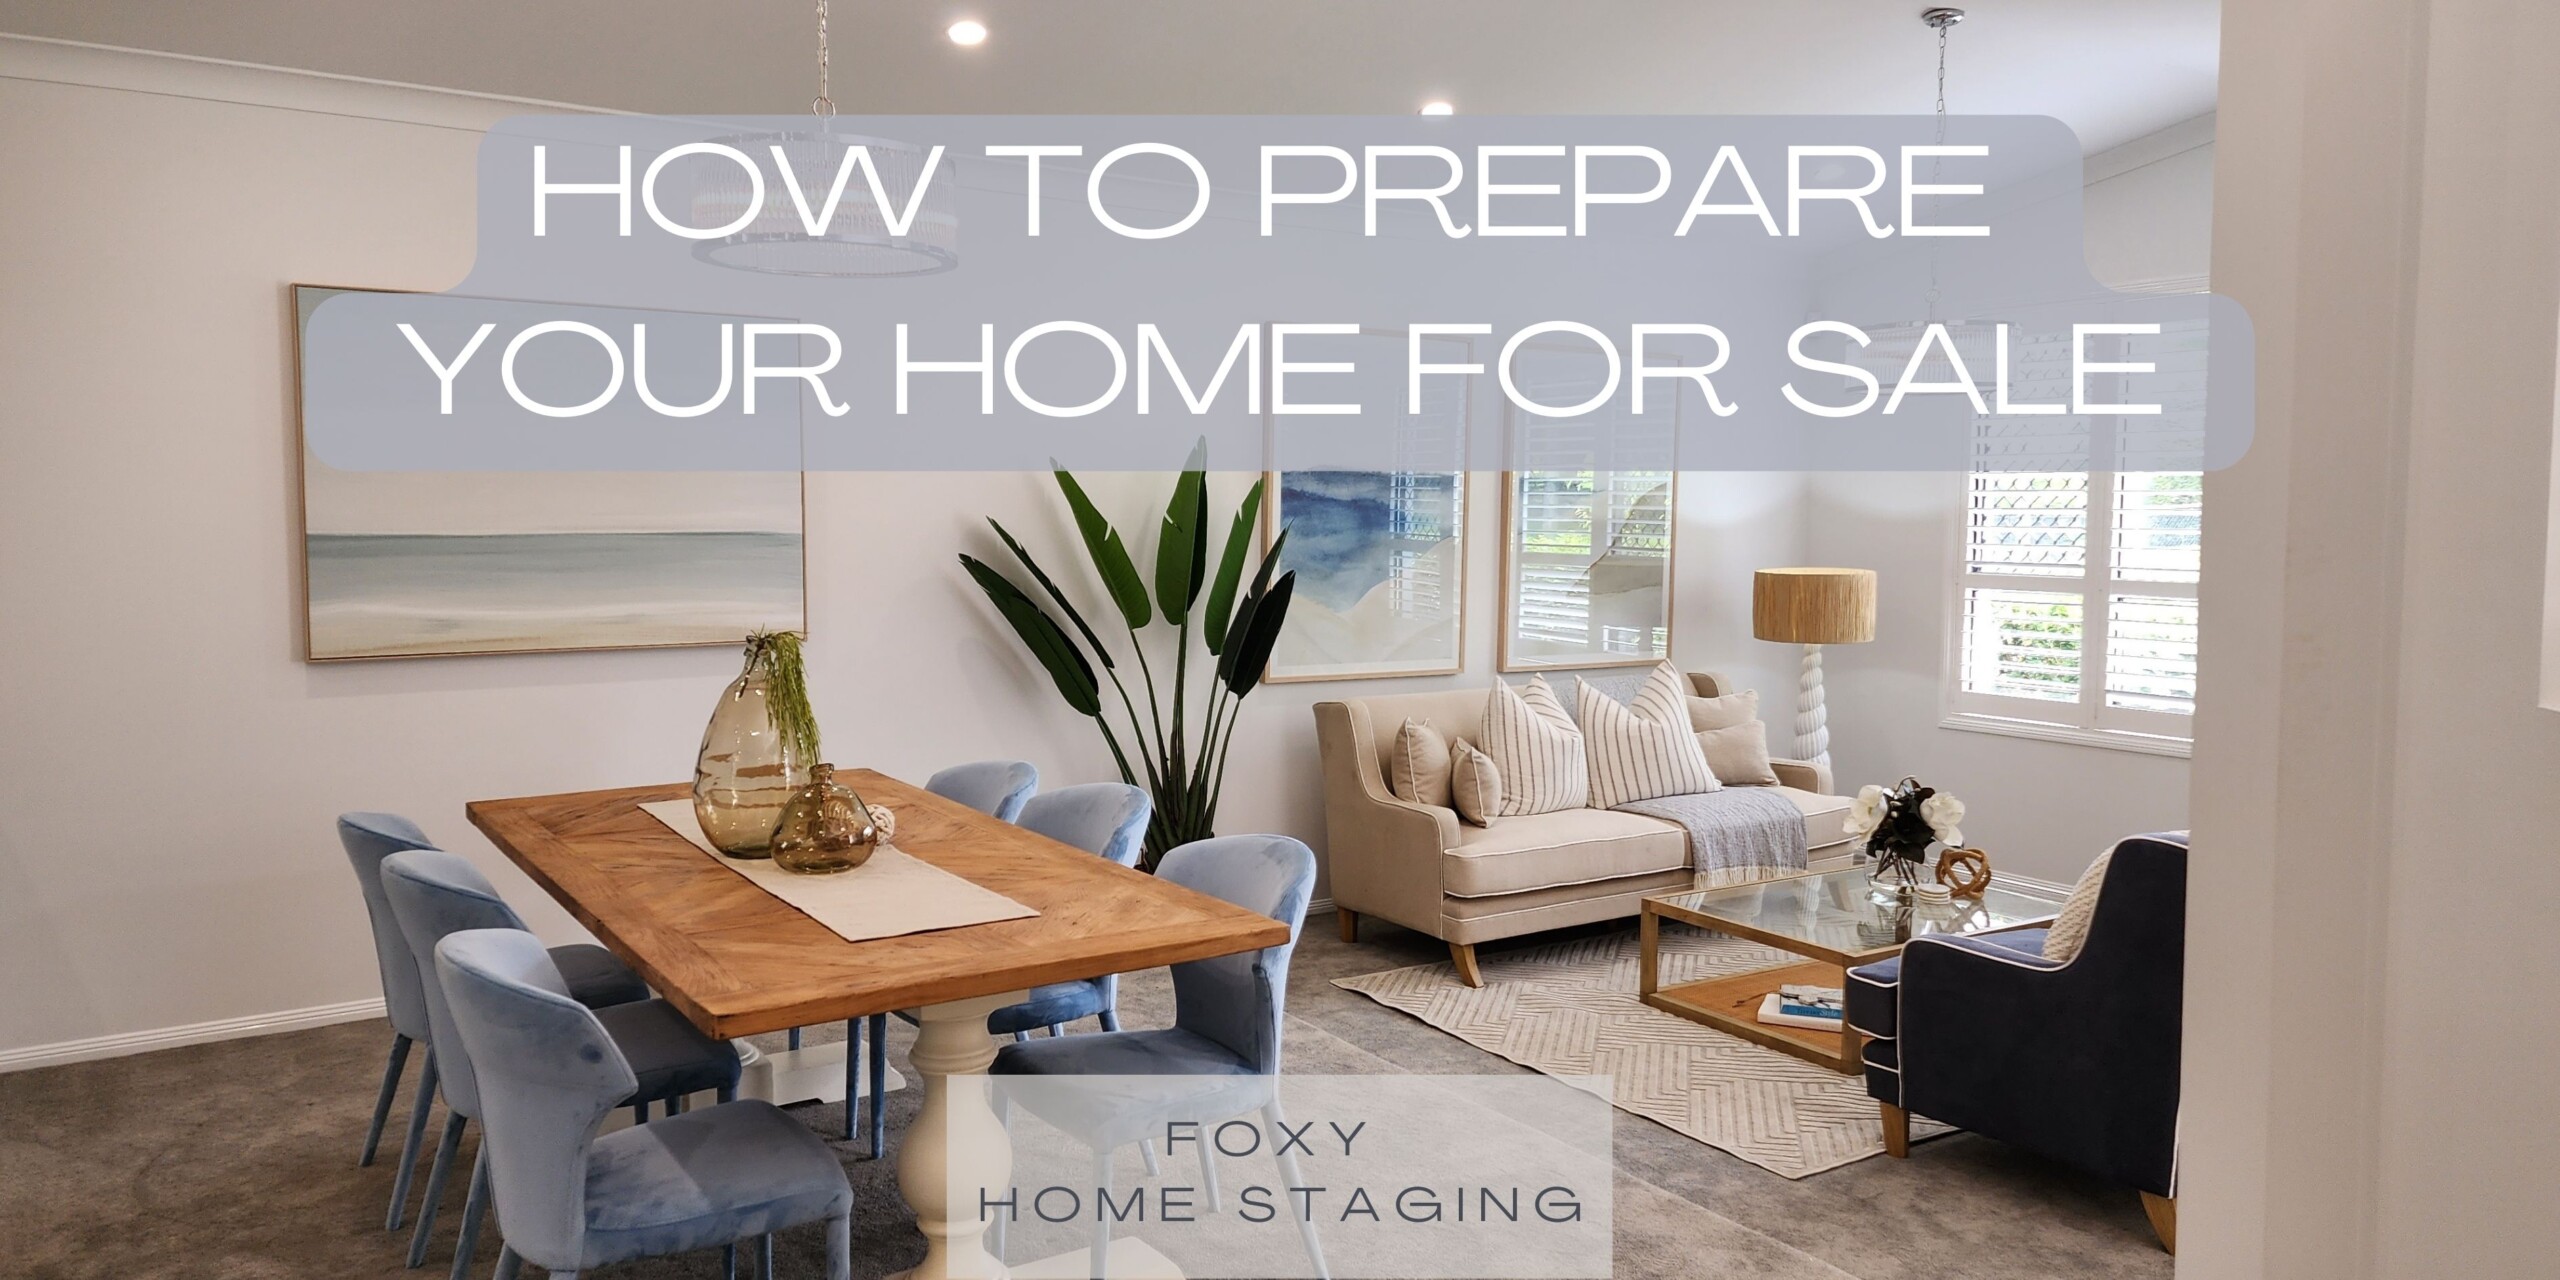 Image of a combined dining and living room. With title: How to Prepare Your Home for Sale.